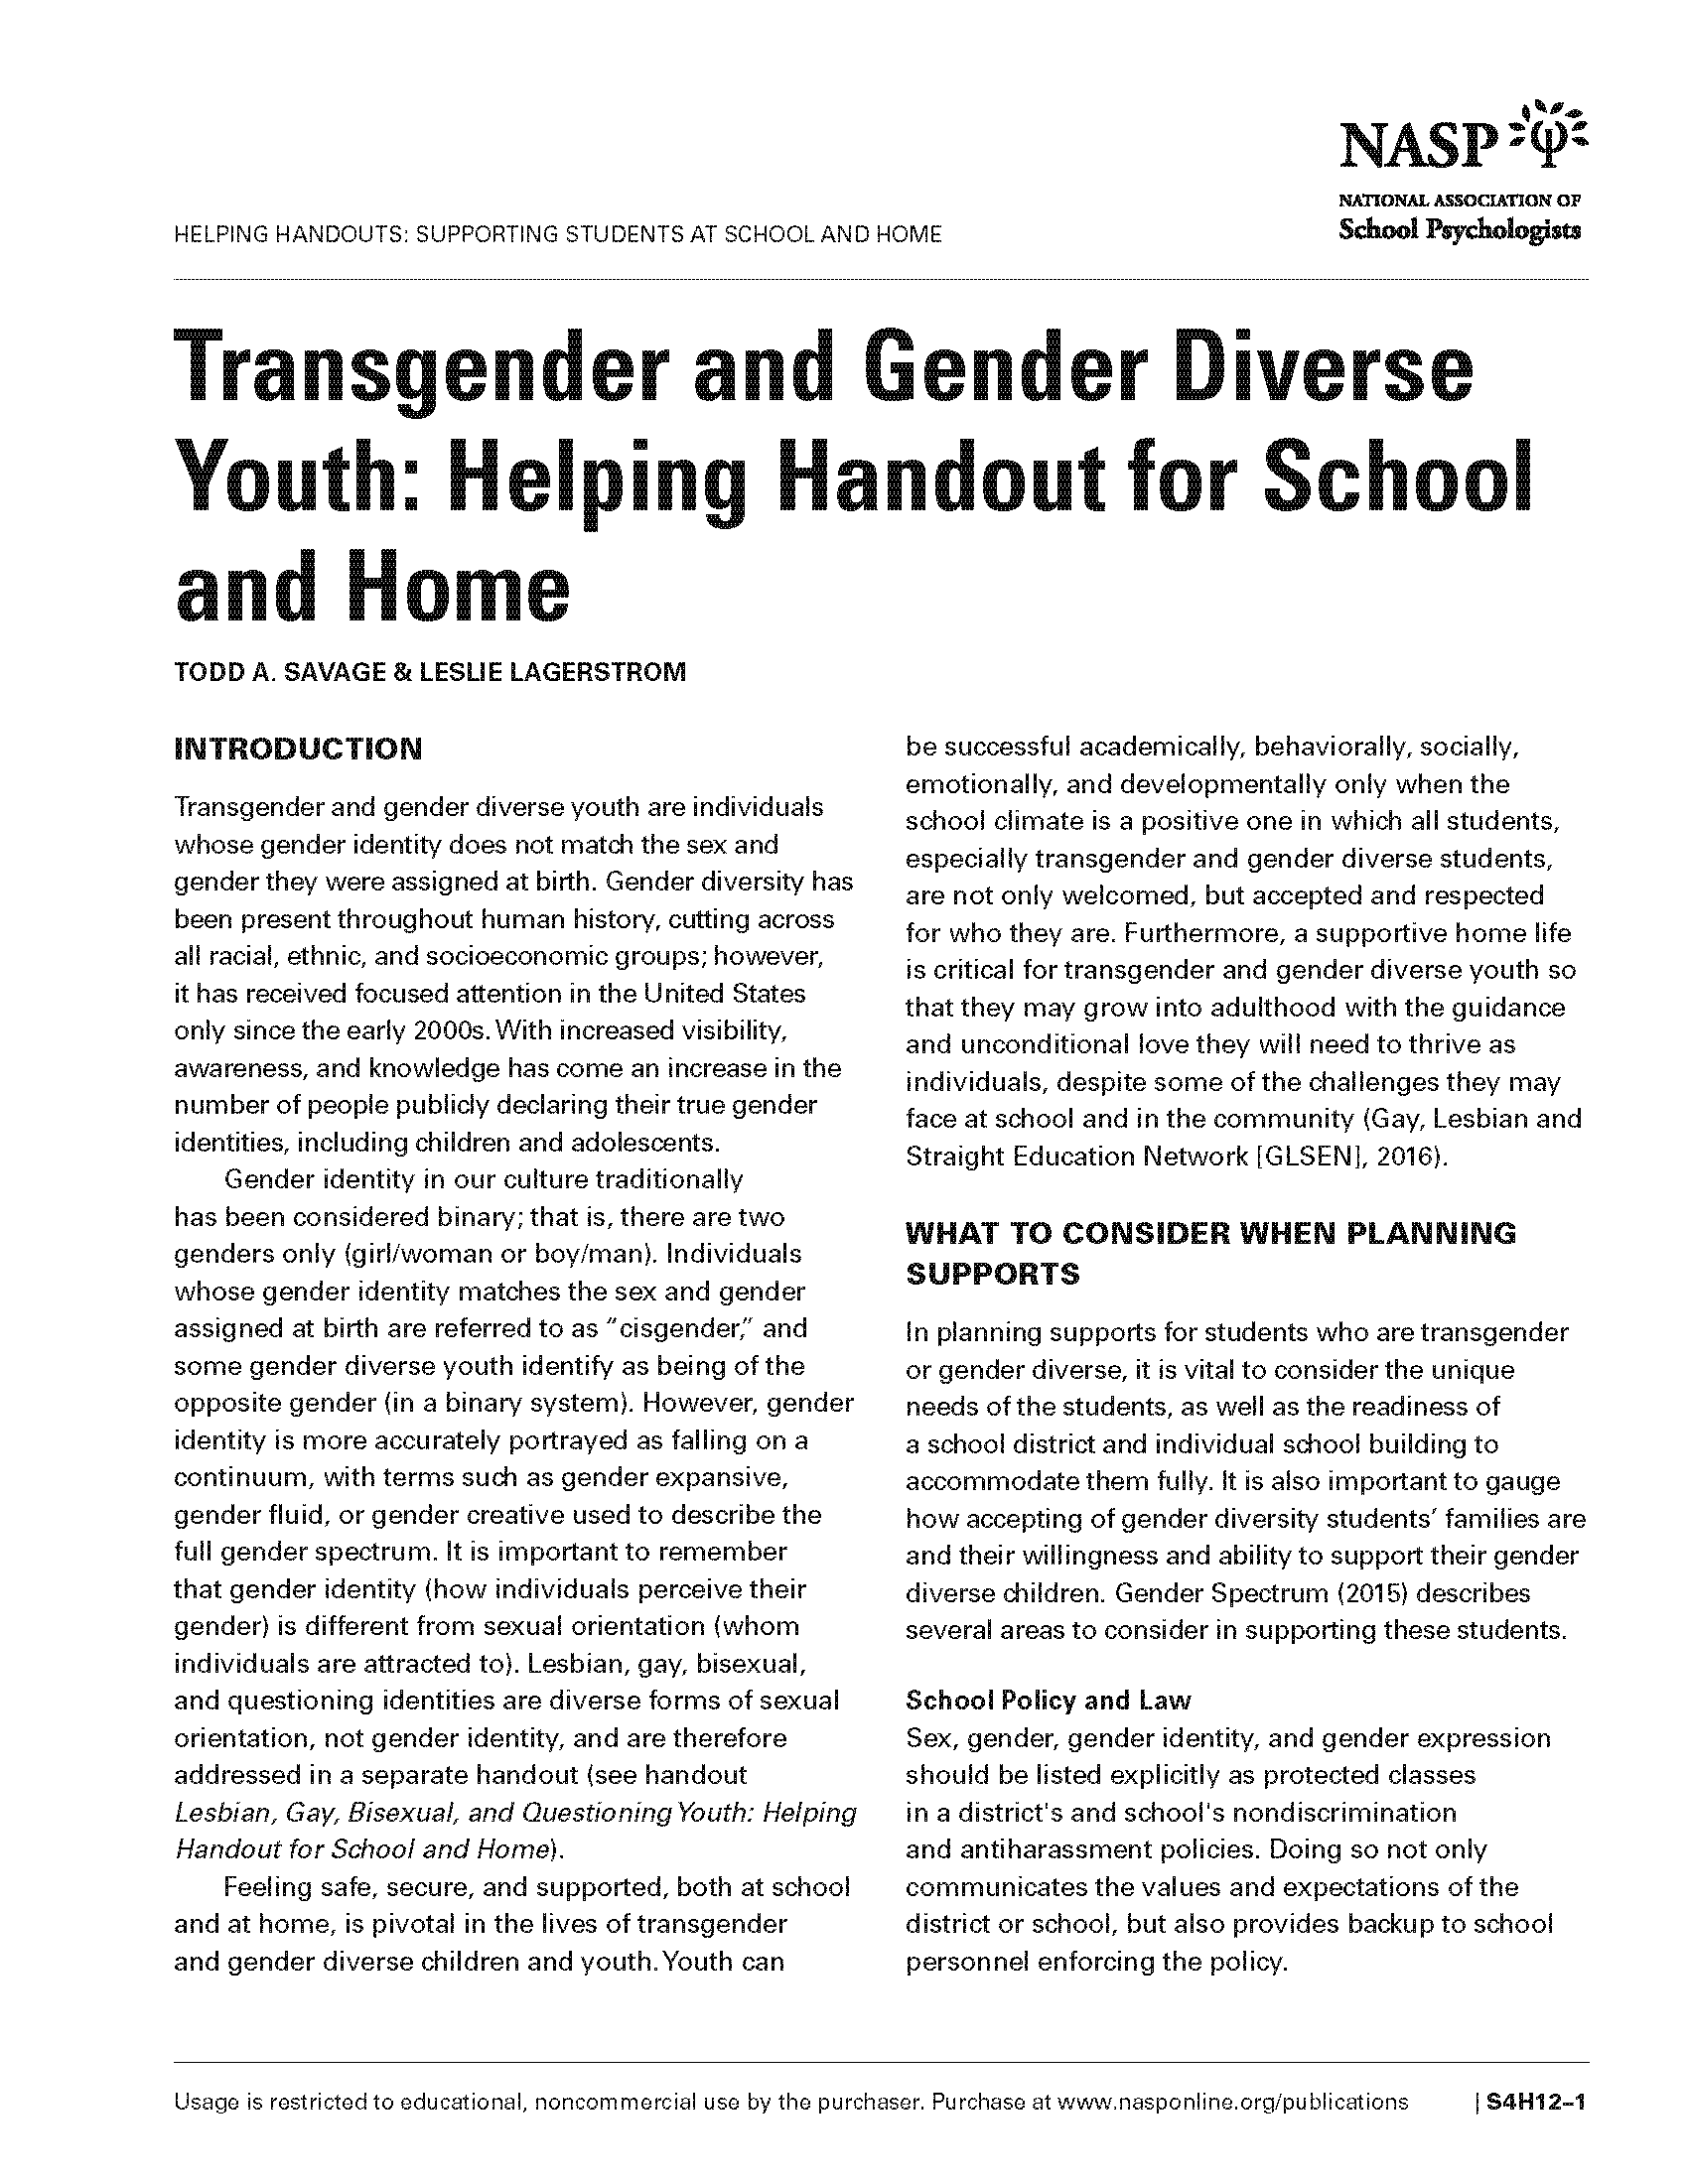 Transgender and Gender Diverse Youth: Helping Handout for School and Home